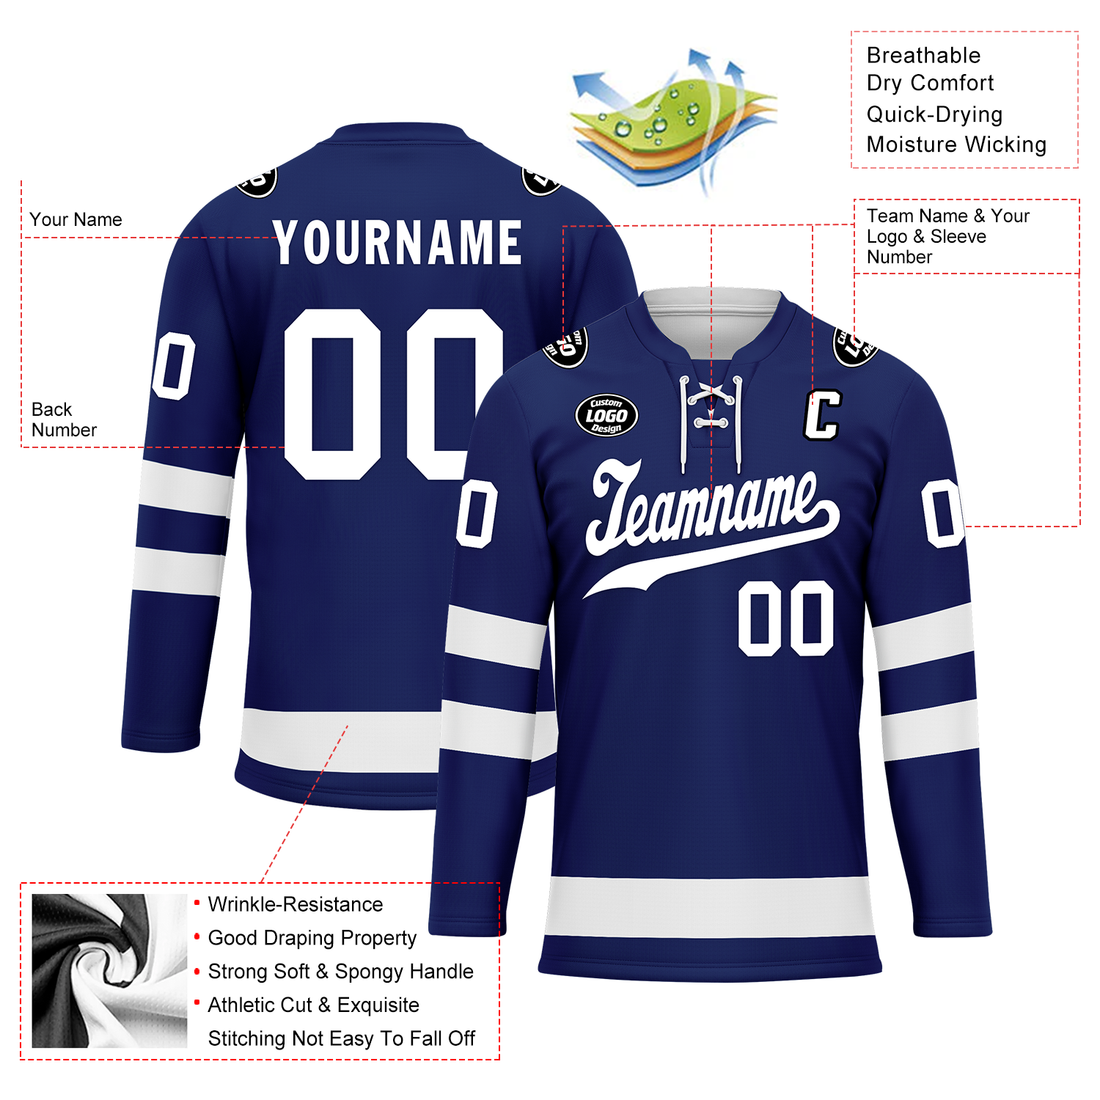 Custom Blue White Personalized Hockey Jersey HCKJ01-D0a70bc